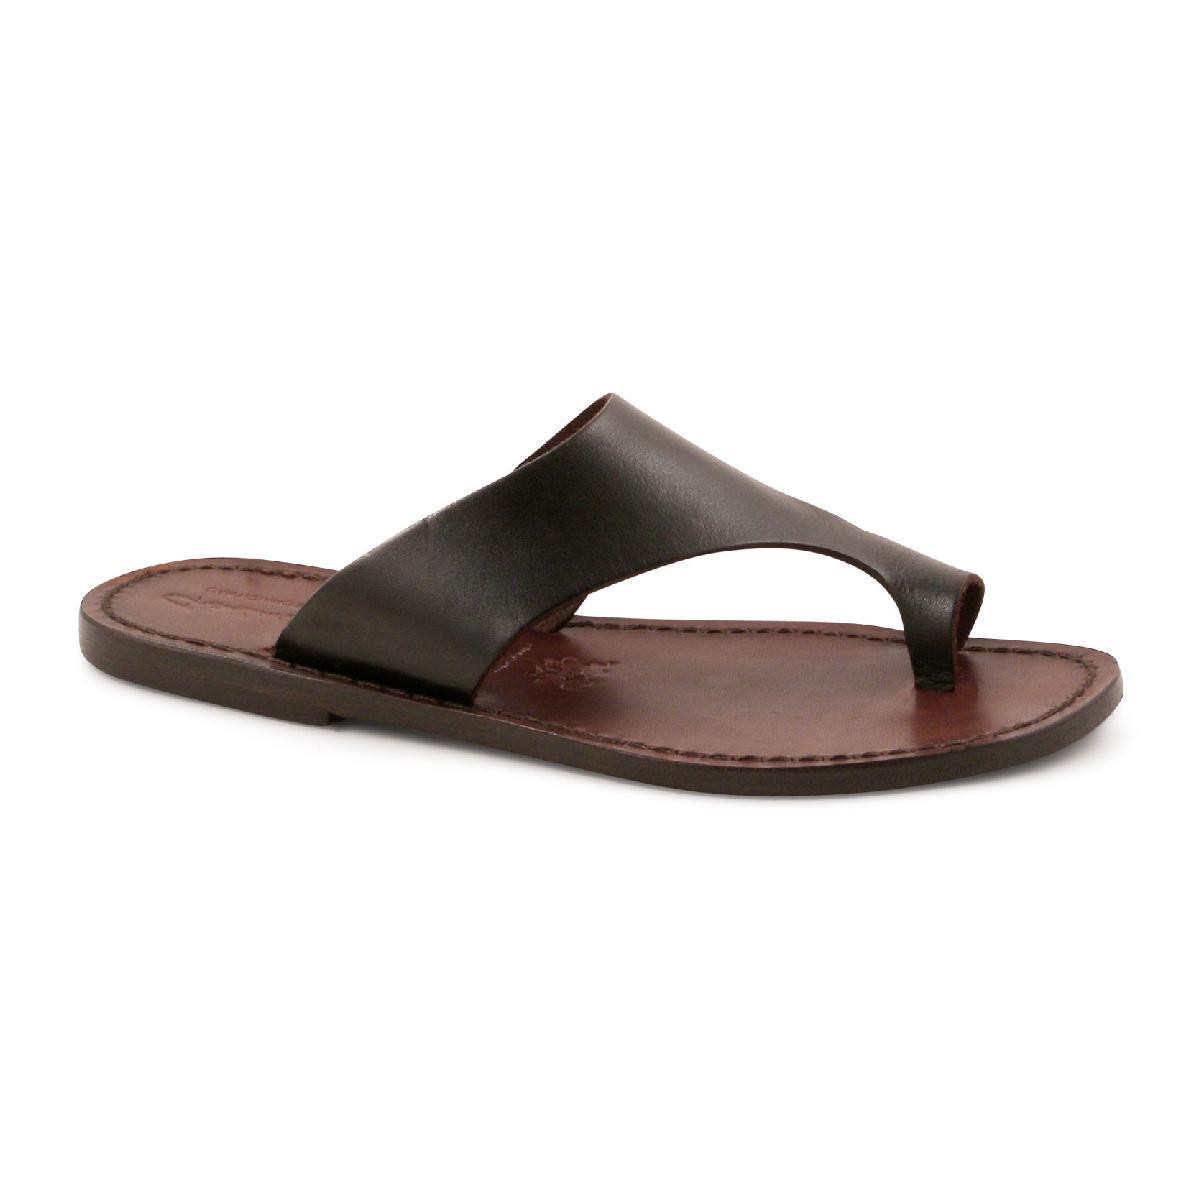 Brown leather thong sandals for women handmade | Gianluca - The leather ...